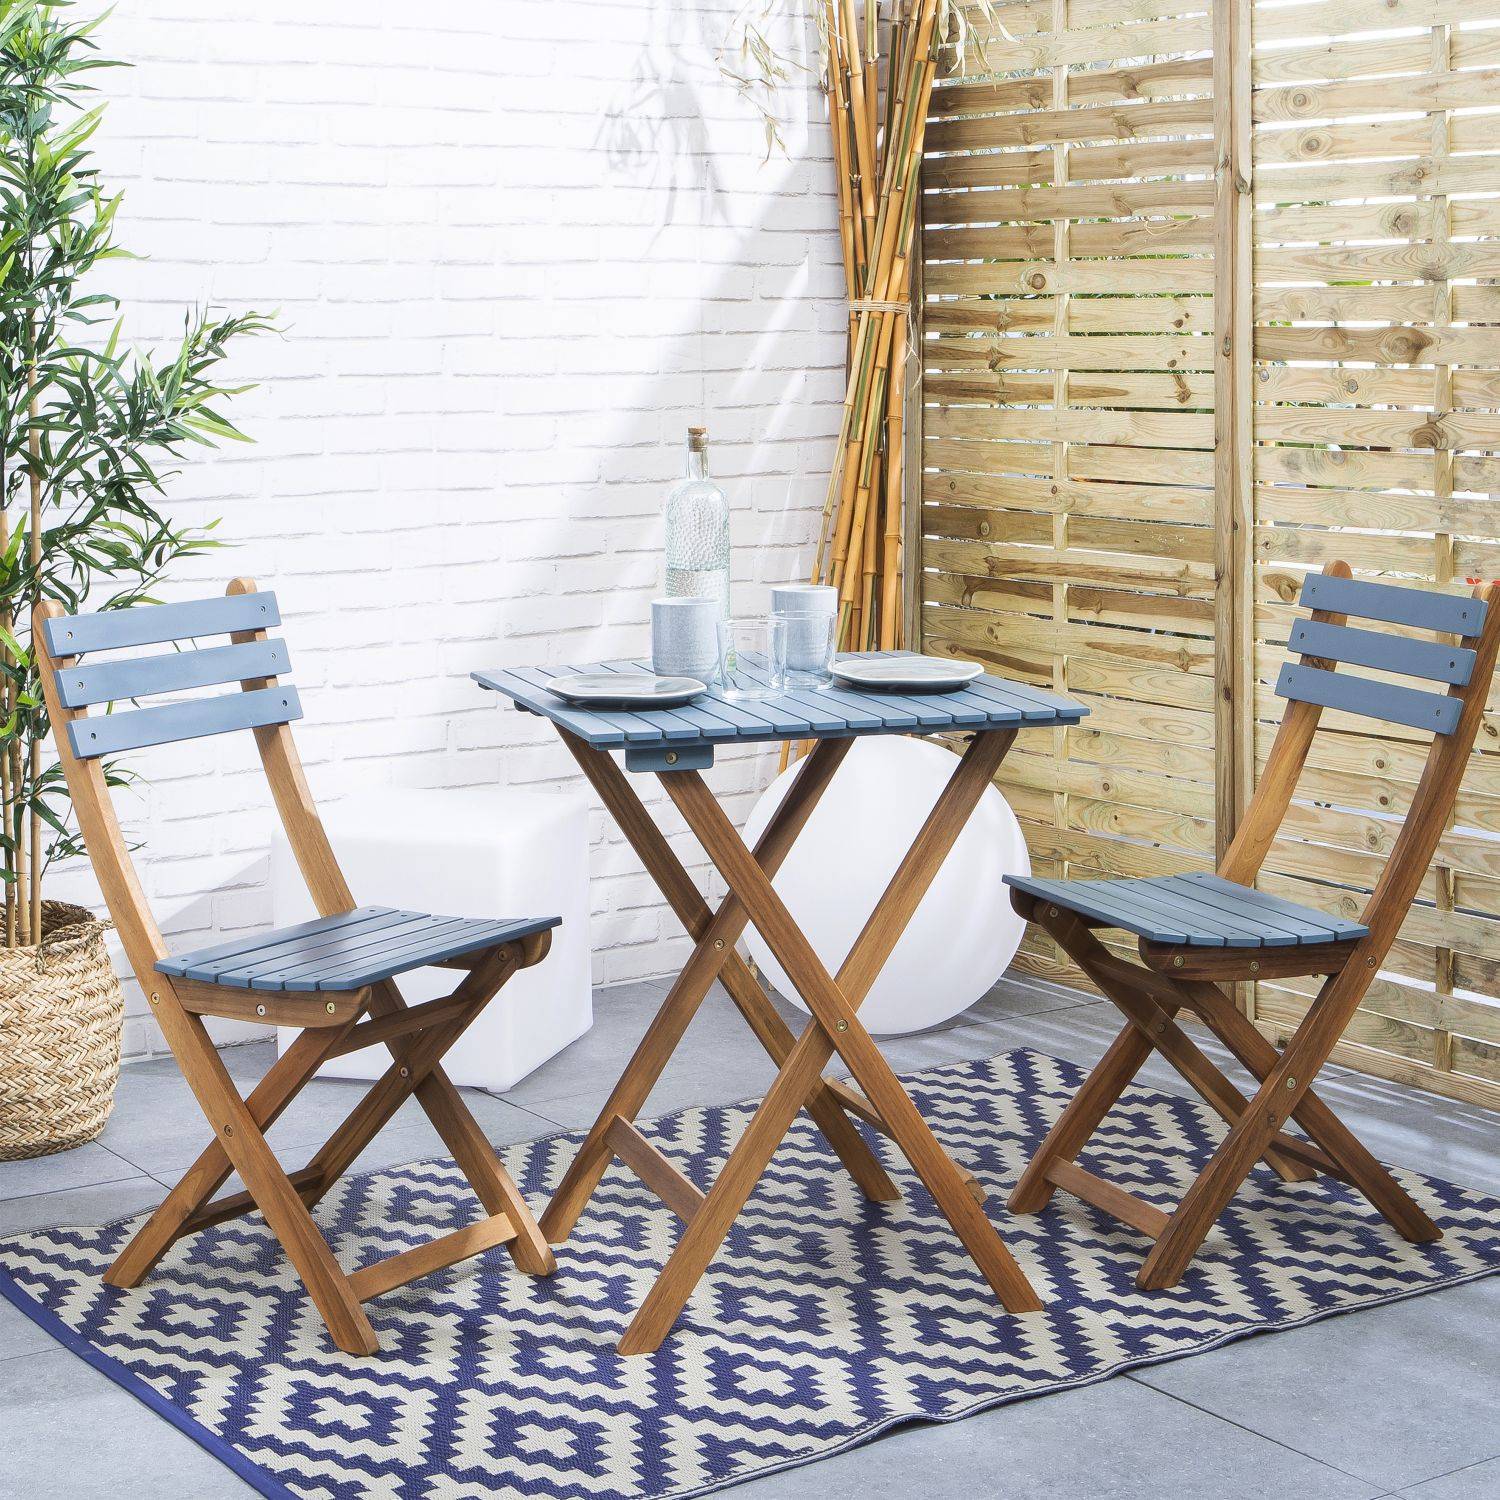 2-seater foldable wooden bistro garden table with chairs, 60x60cm - Barcelona - Grey Blue Photo1